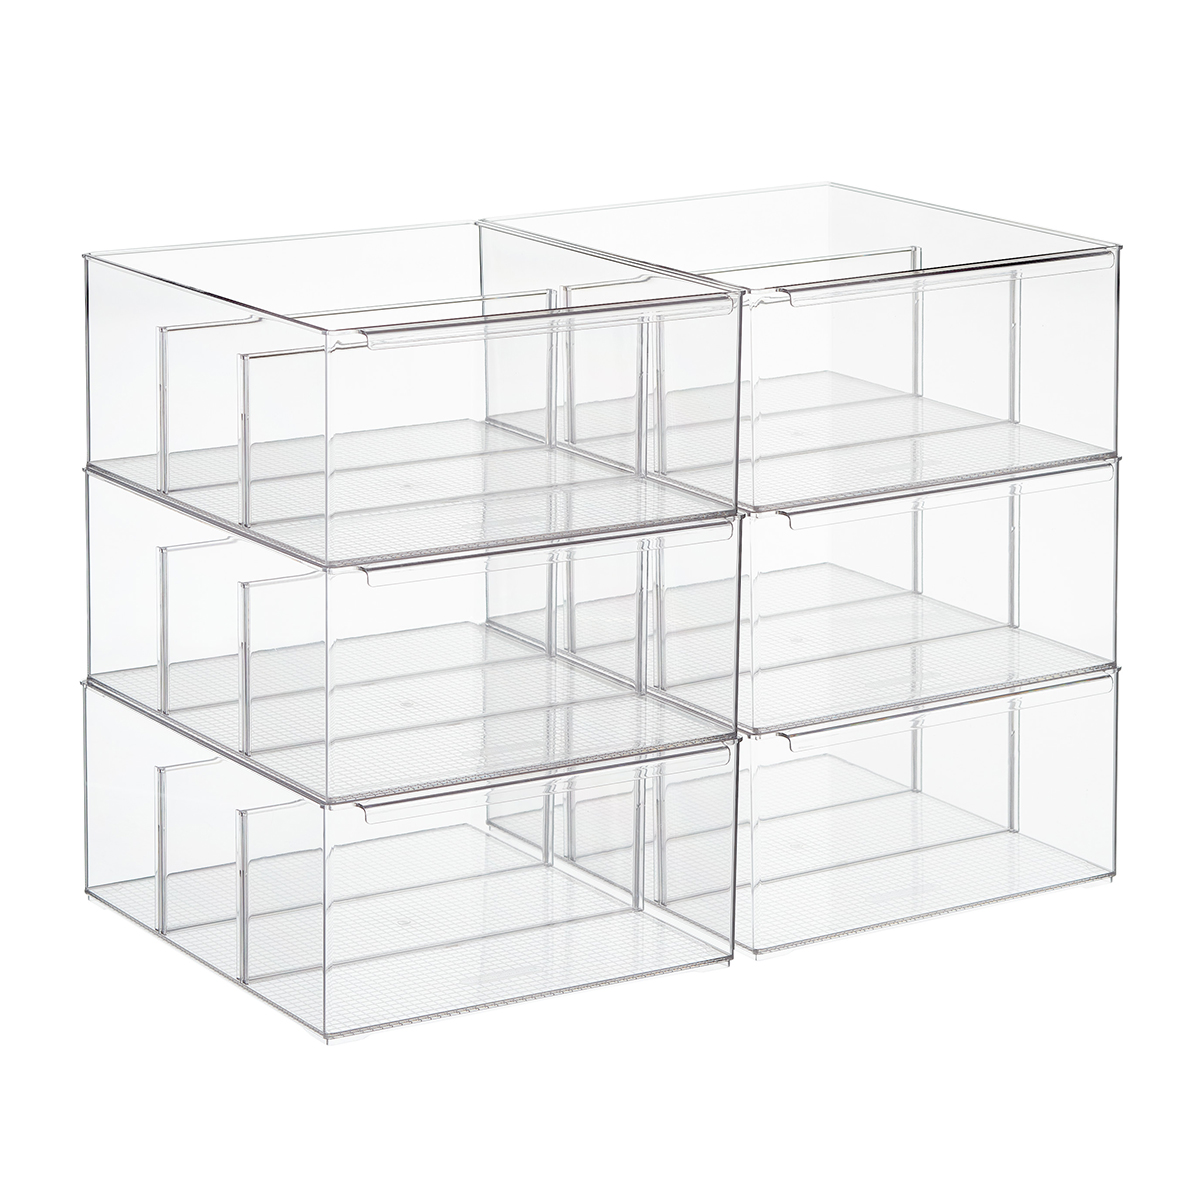 https://www.containerstore.com/catalogimages/448075/10089881_The_Container_Store_Shelf_D.jpg